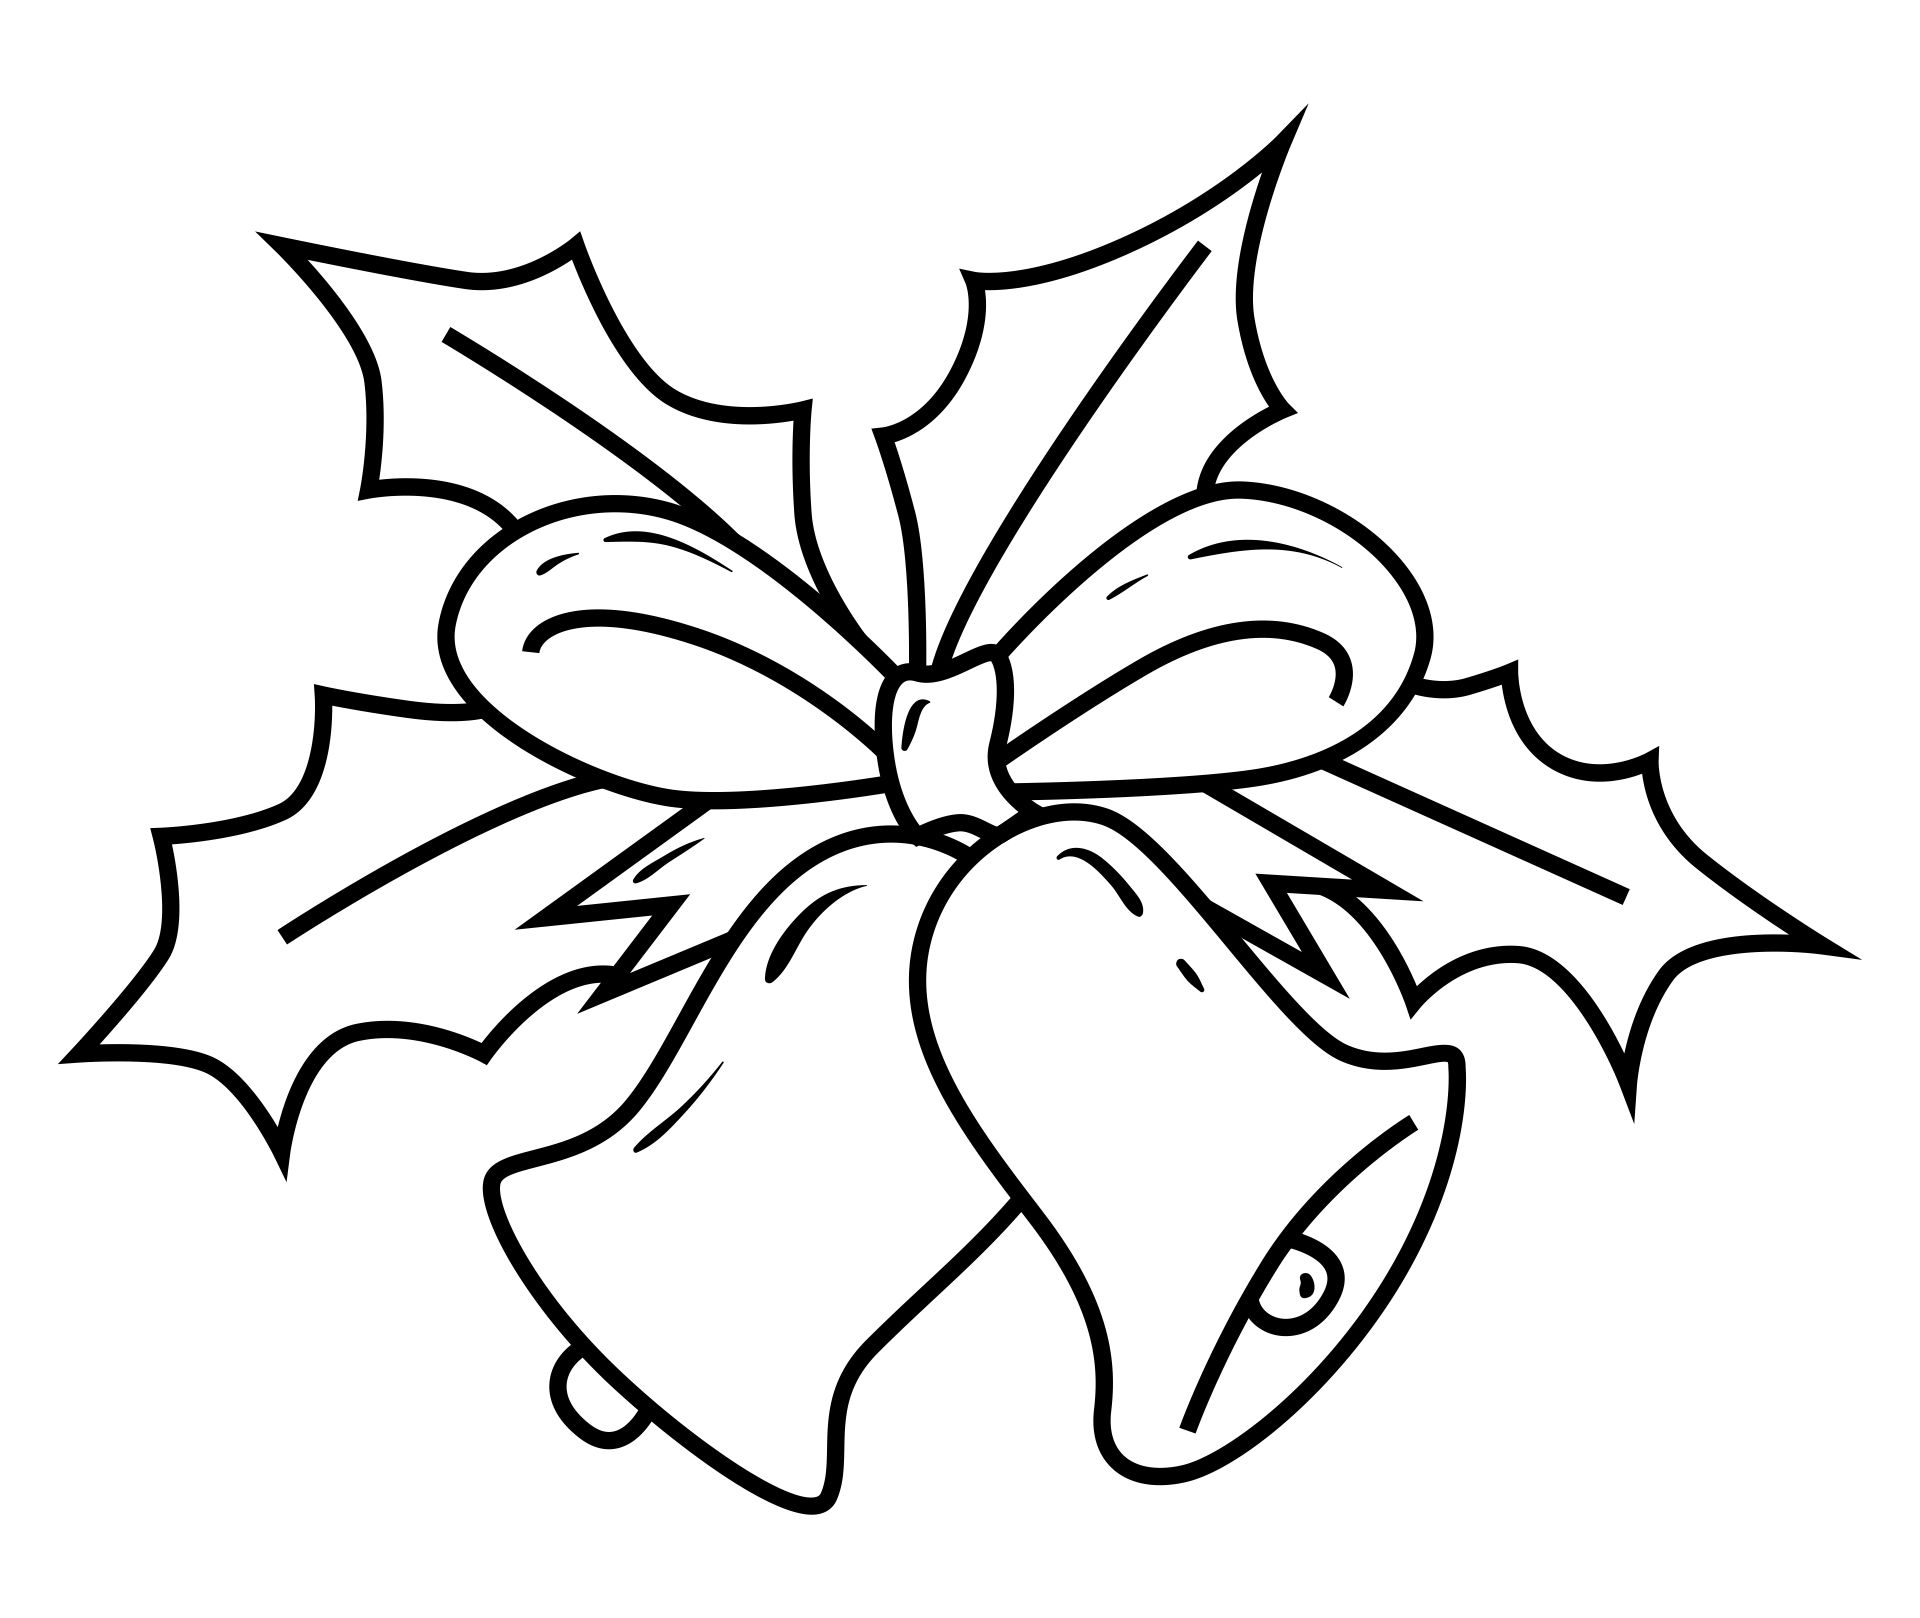 Printable Coloring Pages Of Christmas Bells